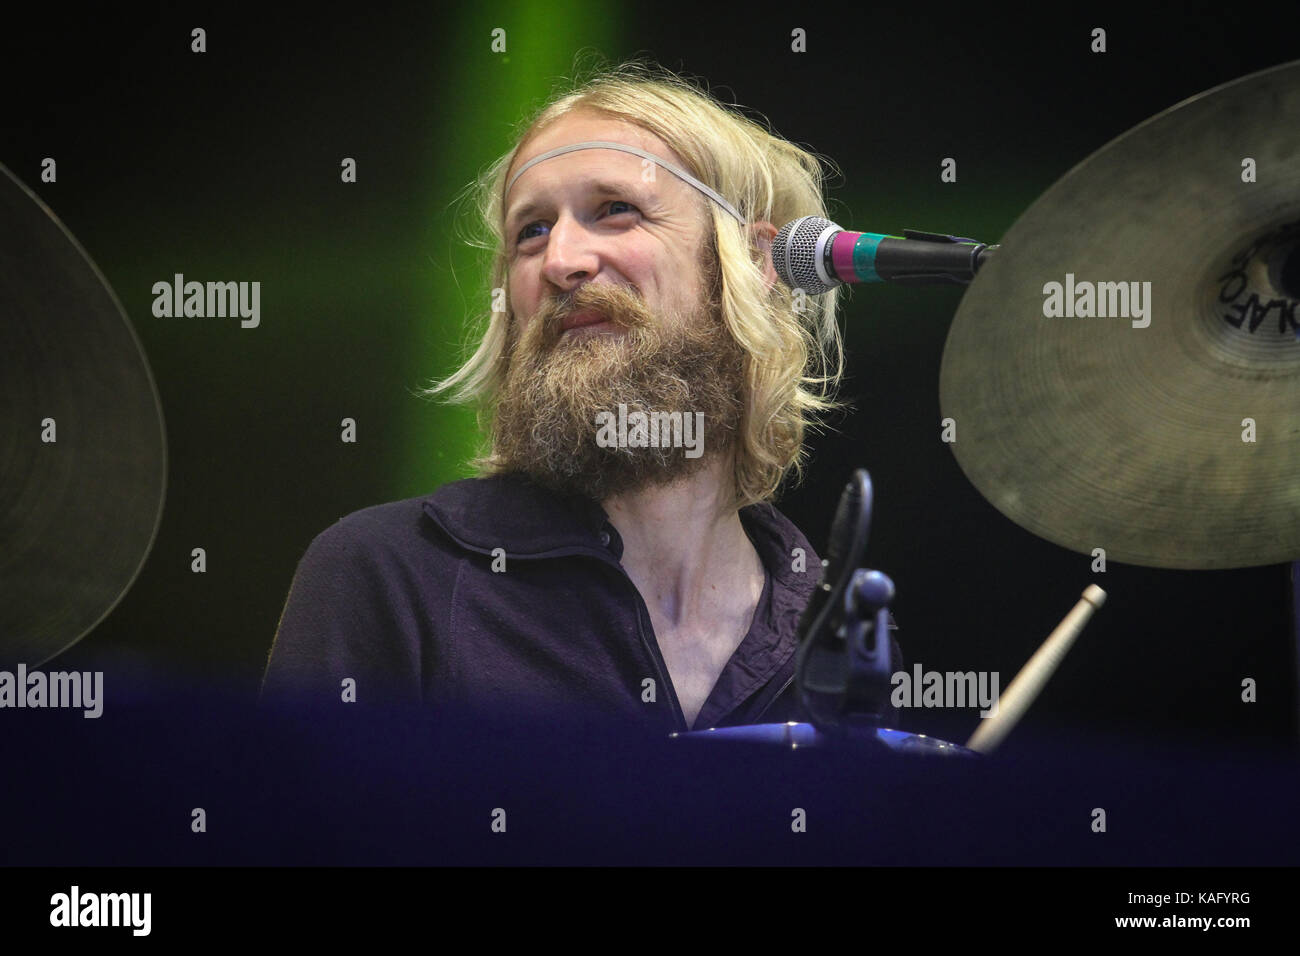 The Norwegian rock band BigBang performs a live concert at the Norwegian music festival Hovefestivalen 2012. Here drummer and musician Olaf Olsen is pictured live on stage. Norway, 29/06 2012. Stock Photo